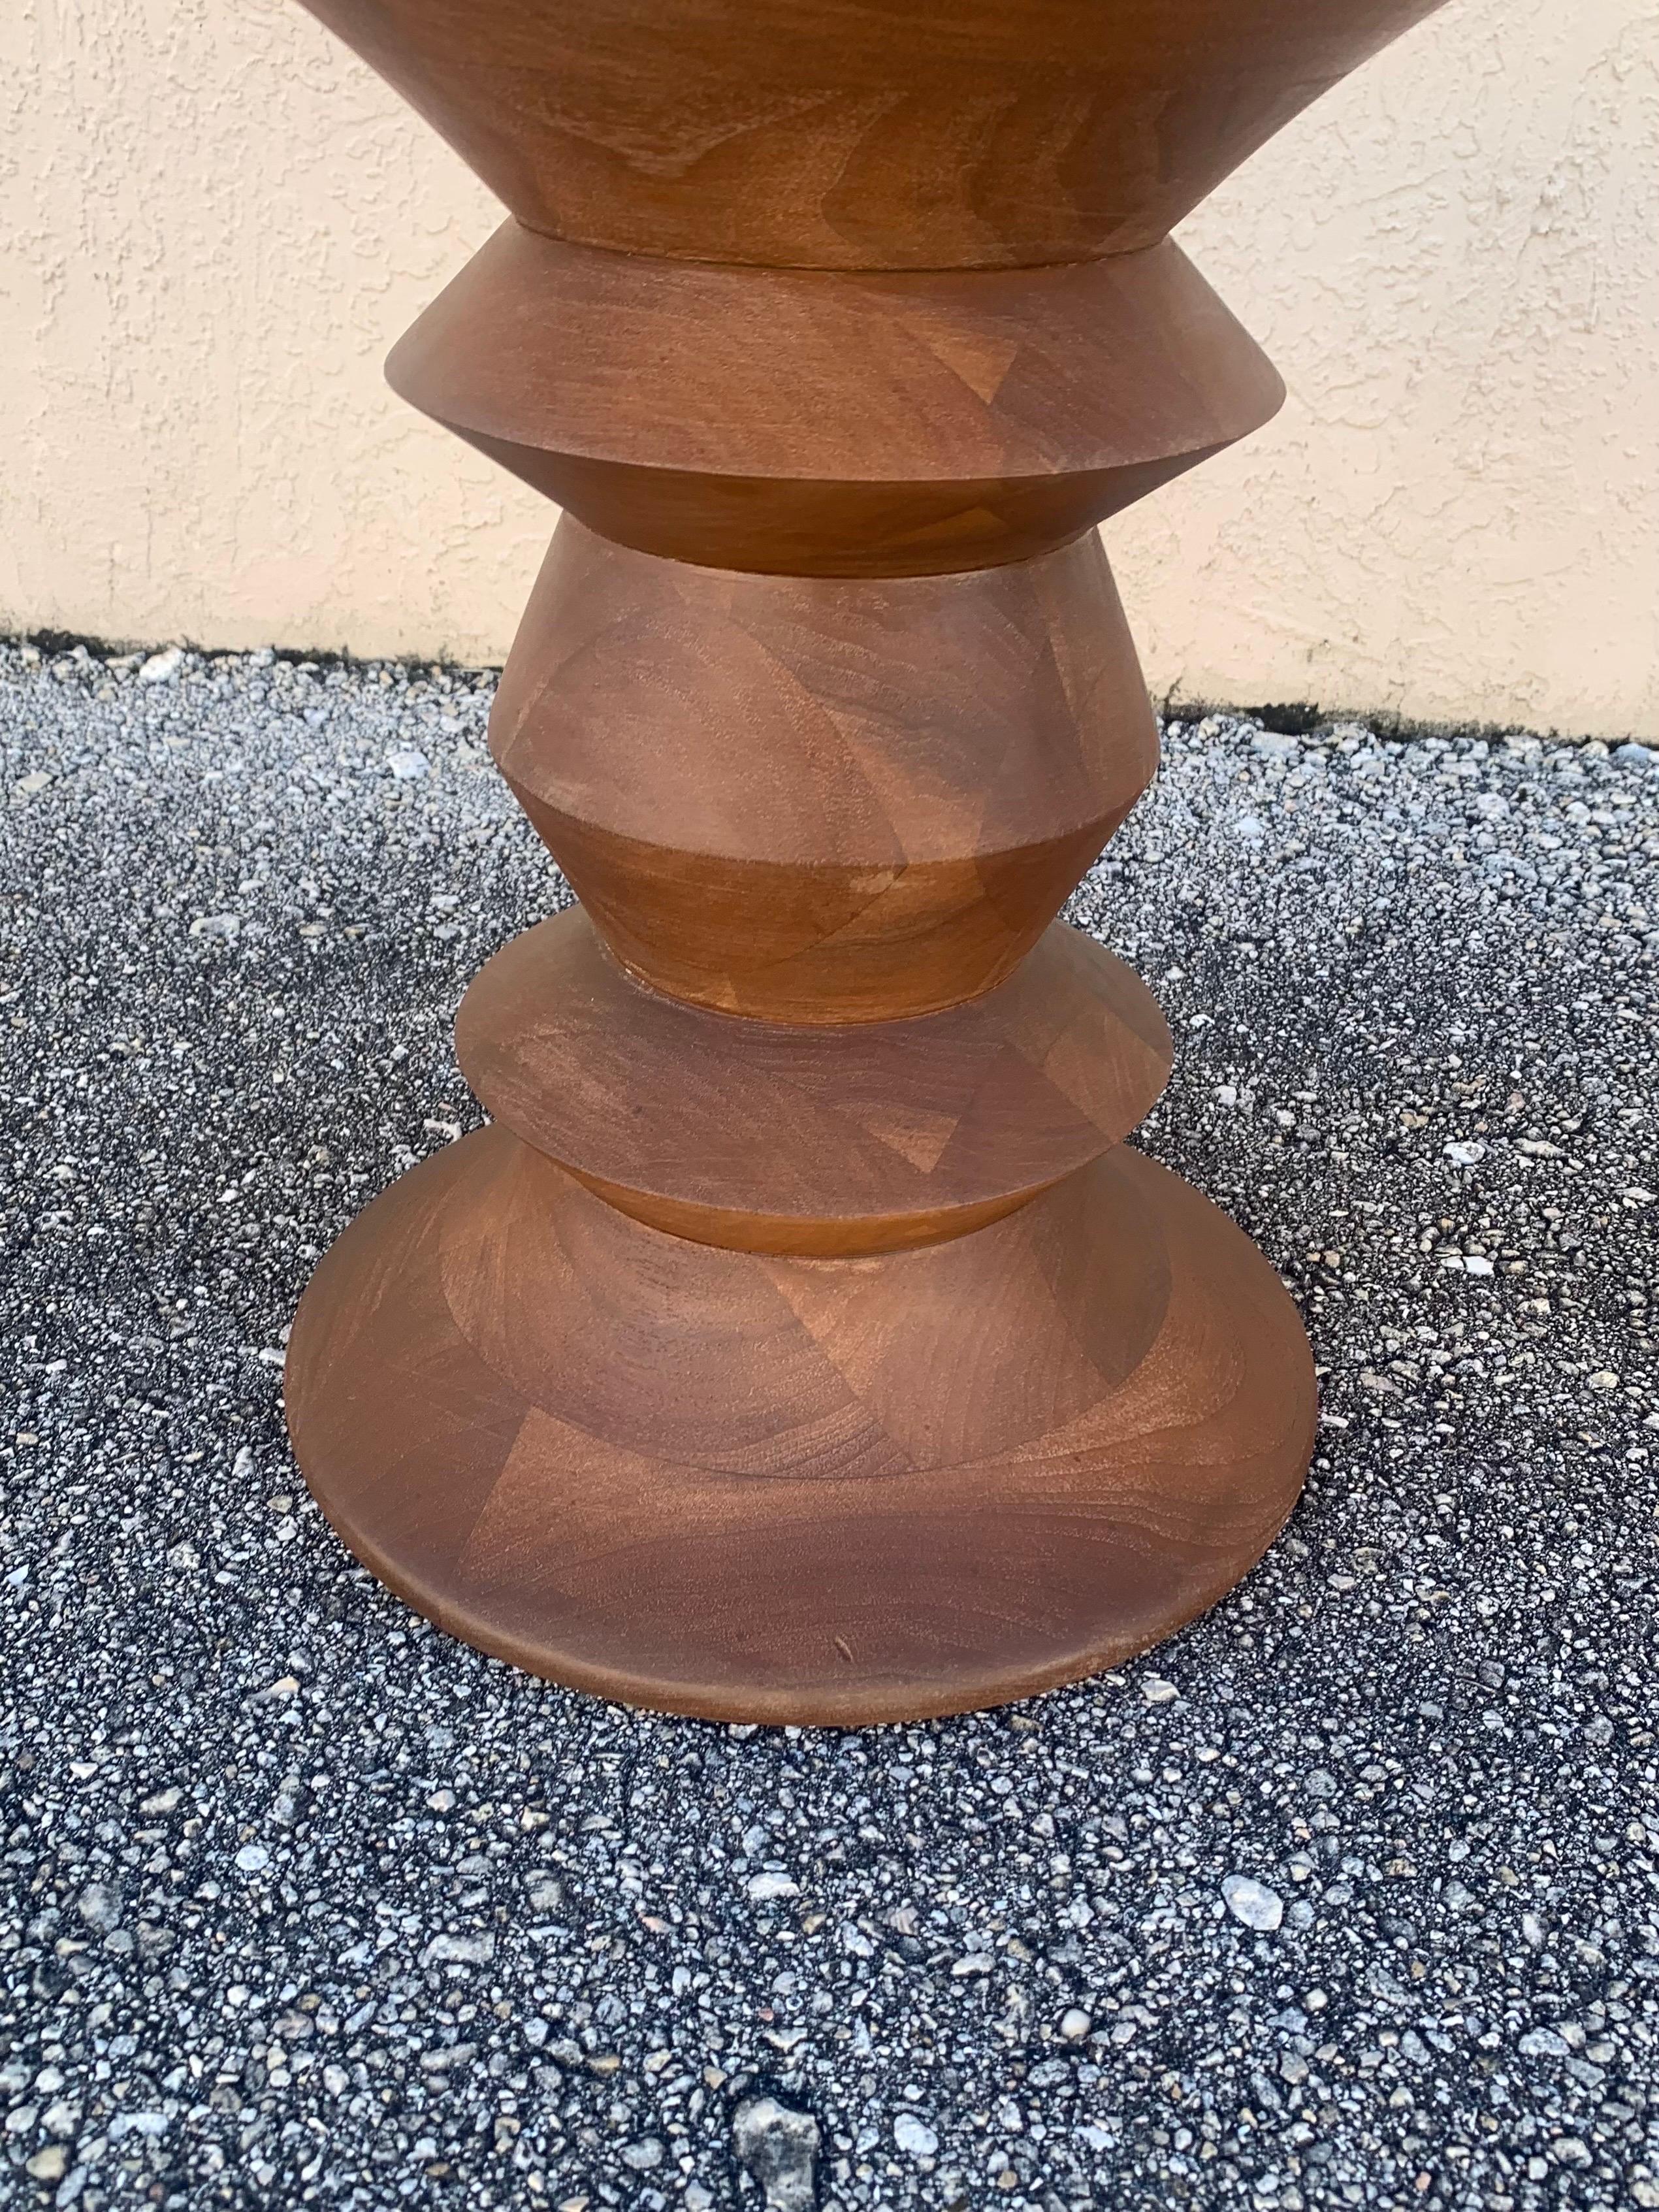 Mid Century Modern Time Life Stool by Charles & Ray Eames In Good Condition For Sale In Boynton Beach, FL